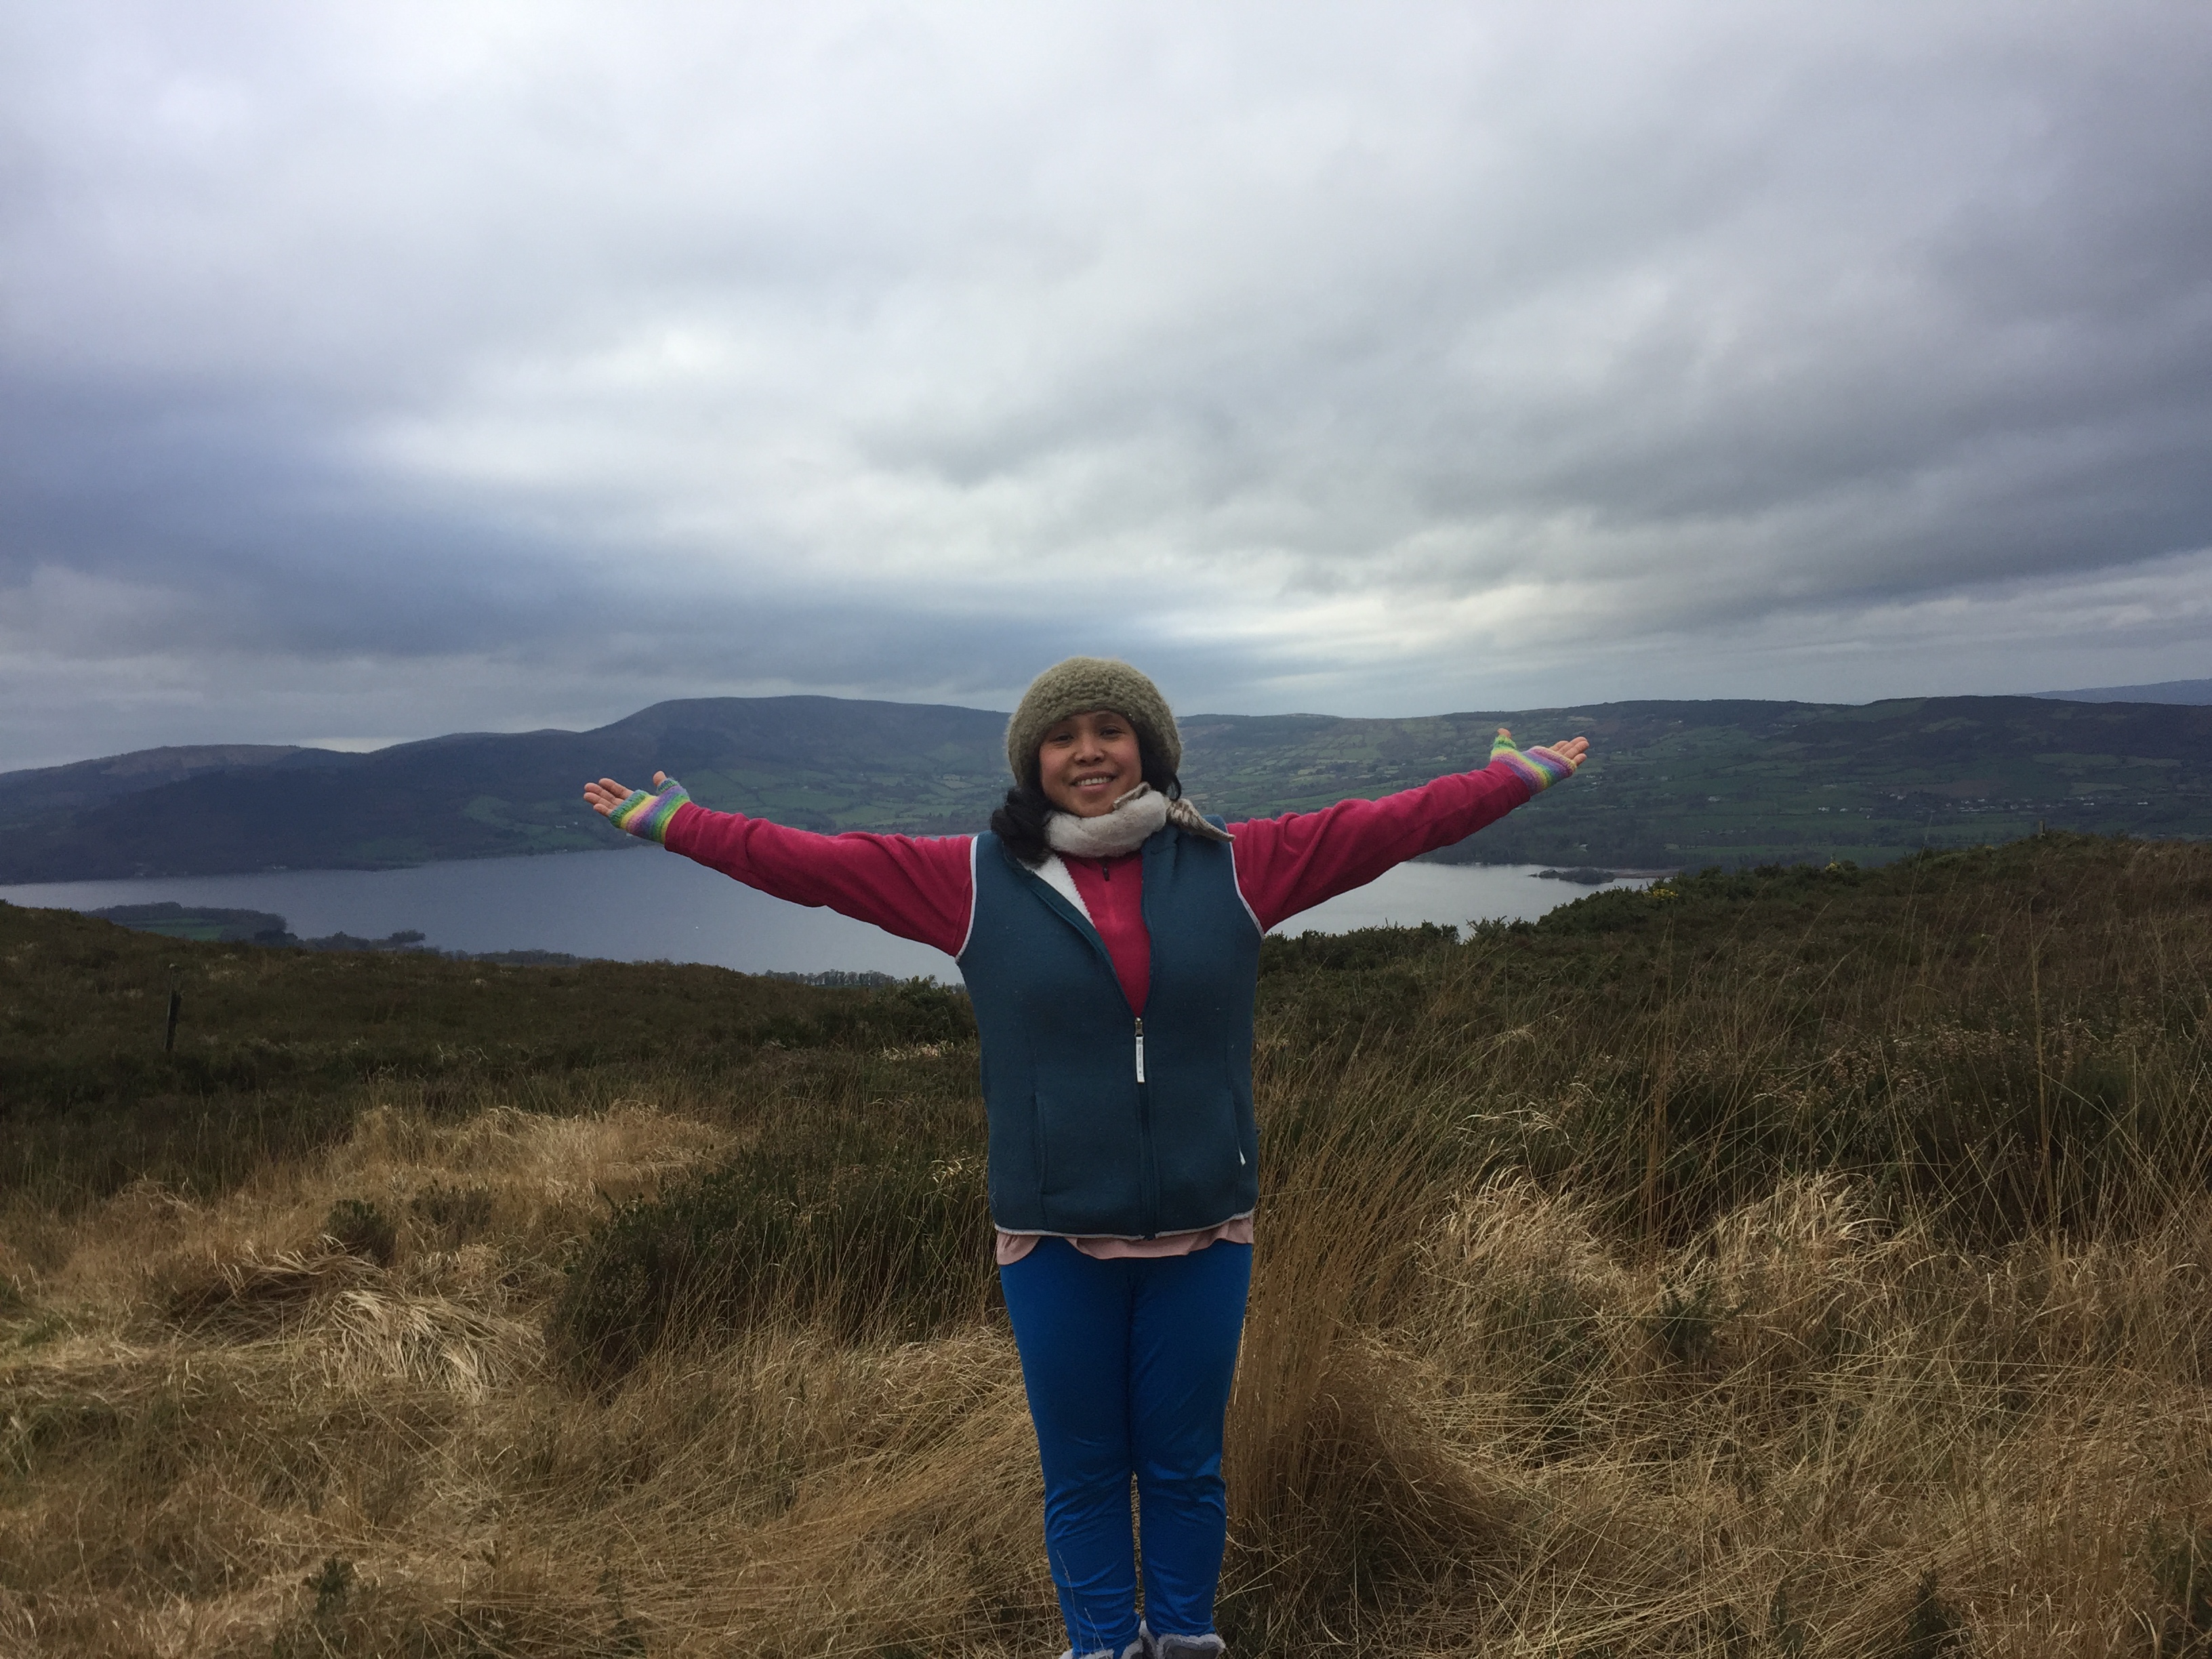 Welcome to Lough Derg - visit me and we can do Eurythmy up the Arra Mountain ranges!